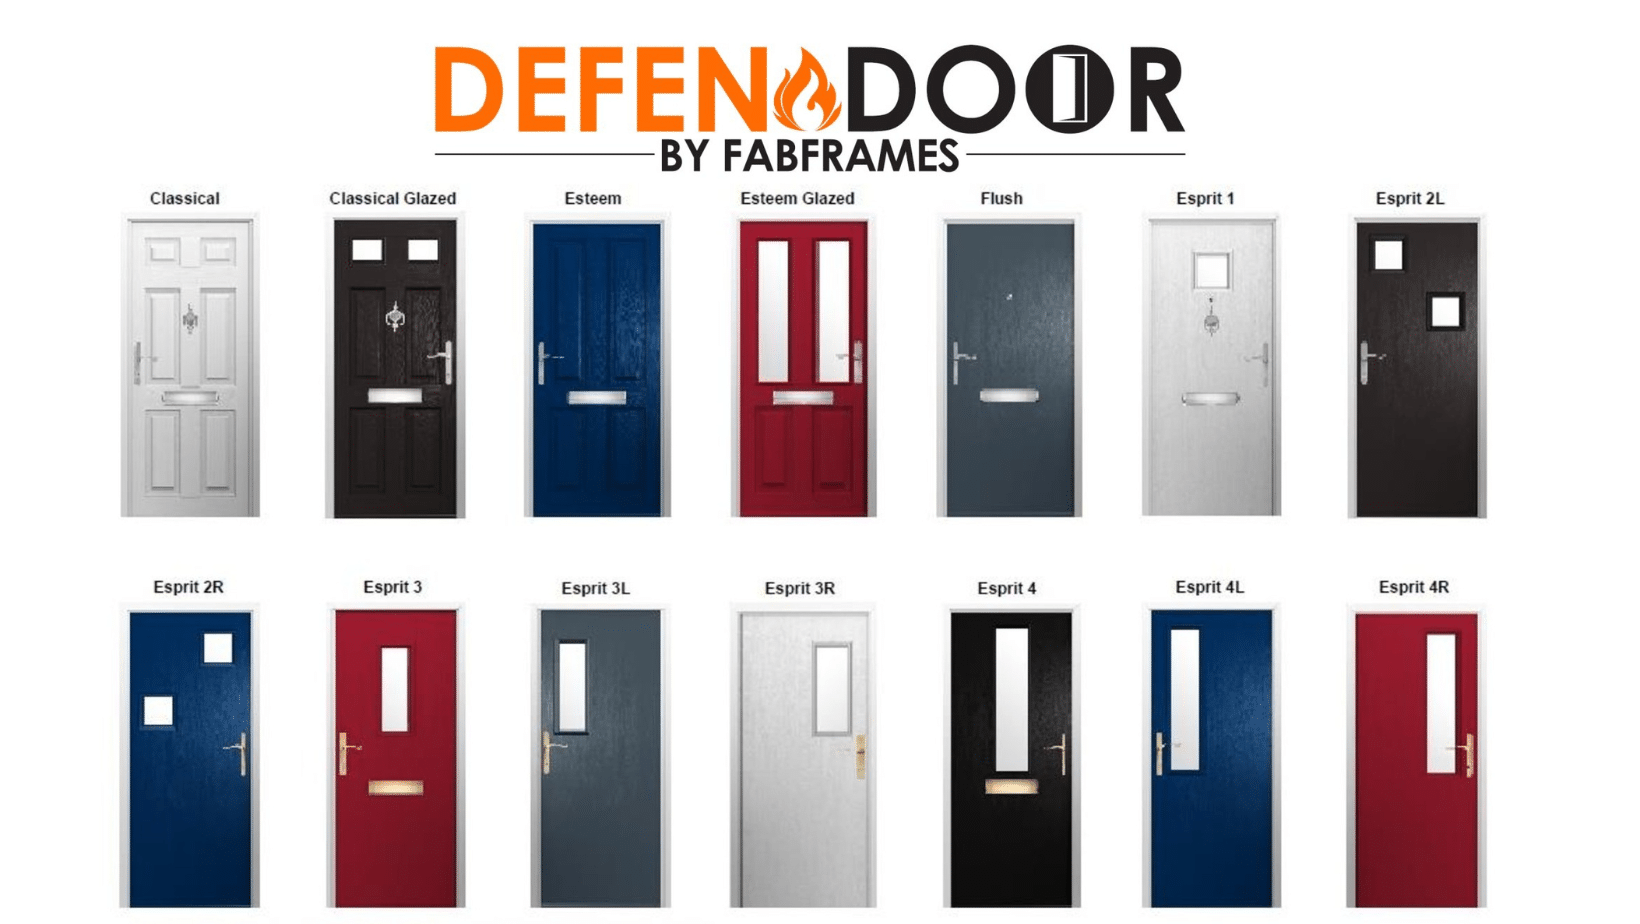 Newton Abbot Fire Doors designs and colours available